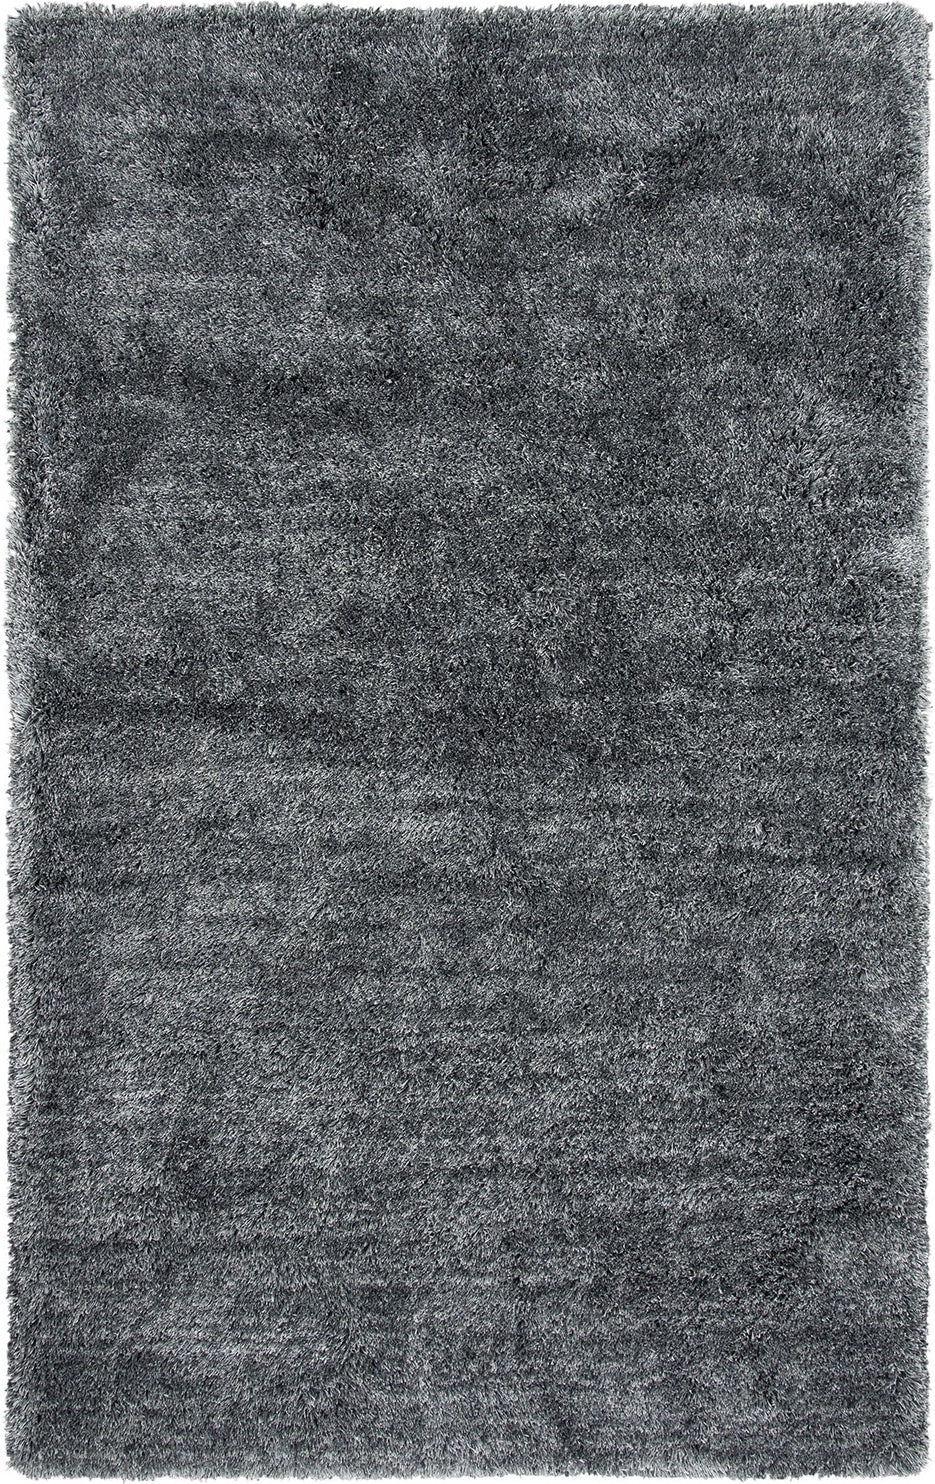 Rizzy Whistler WIS103 Gray Area Rug main image